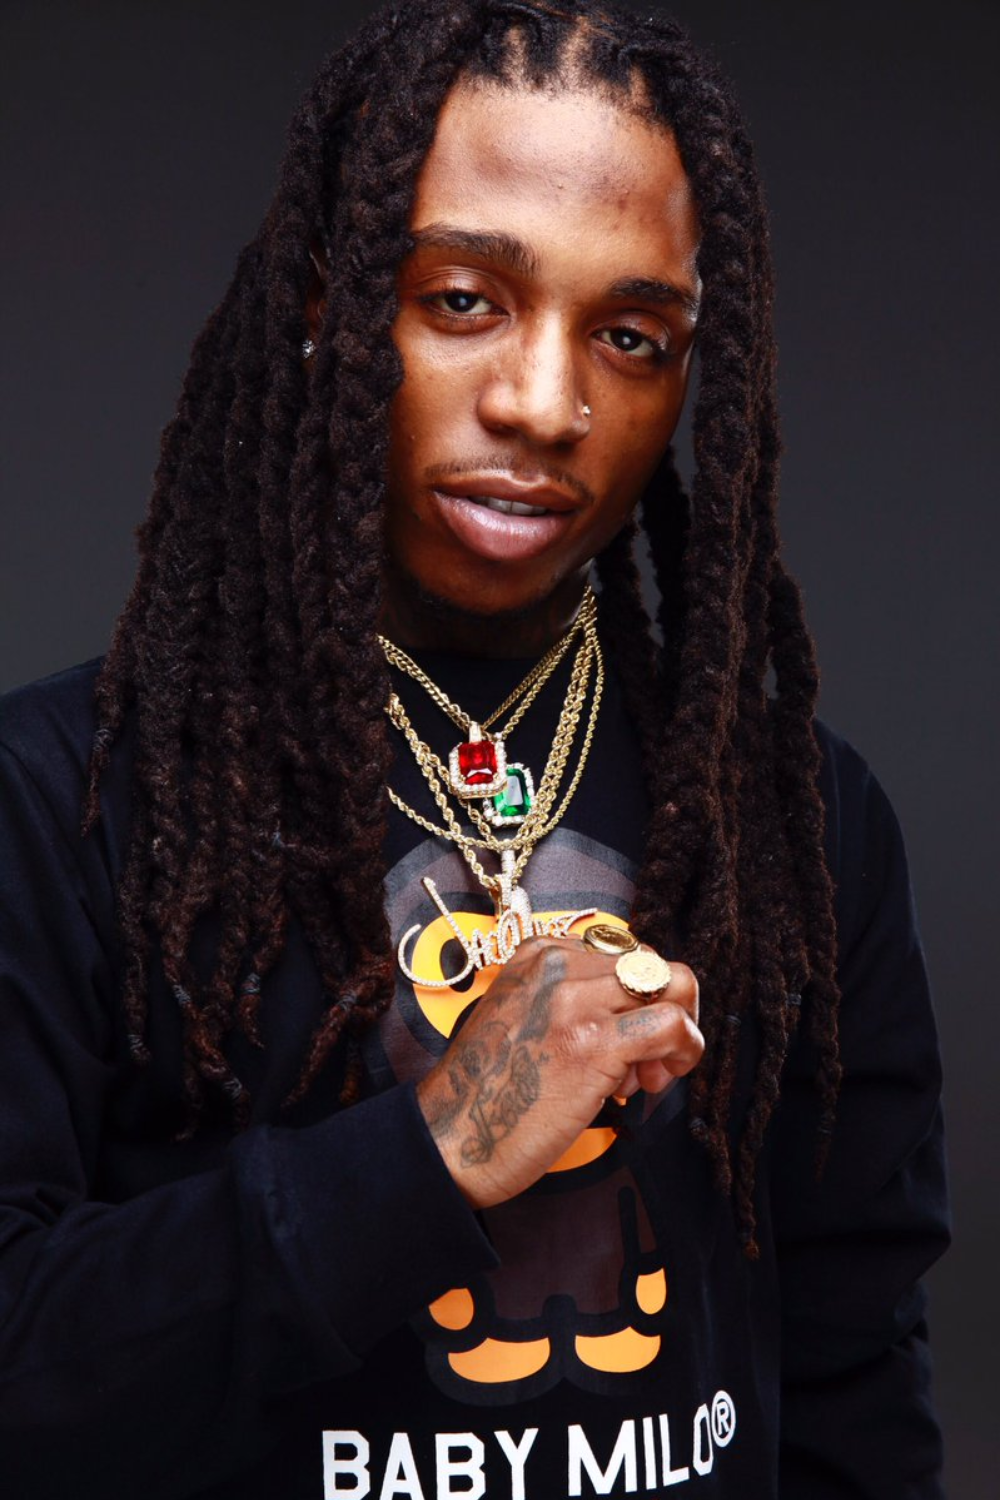 Jacquees Dreads in 2 srand twists